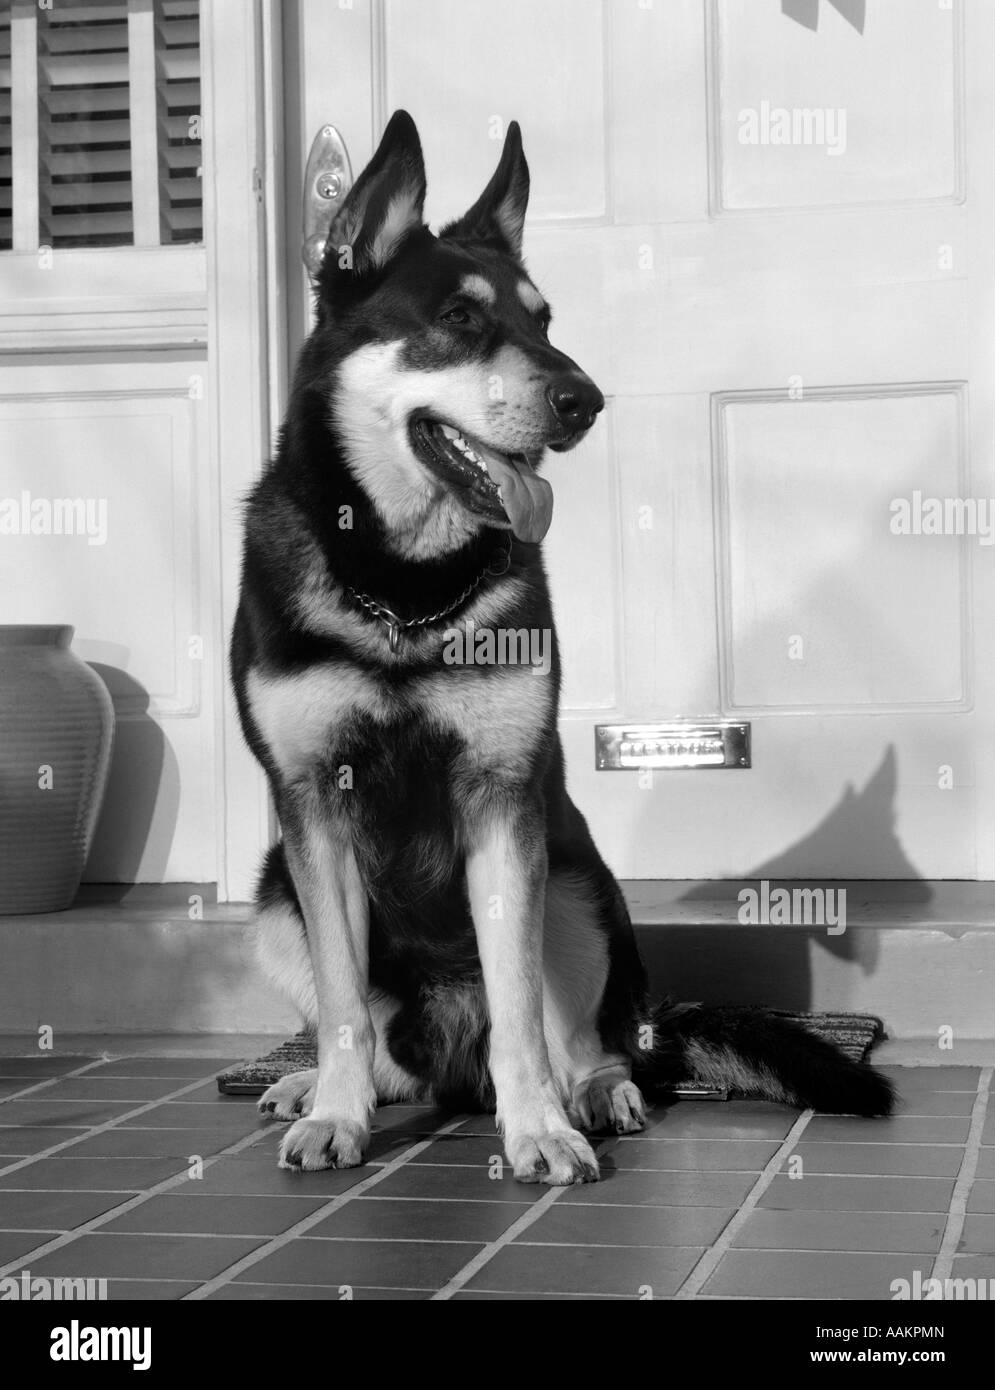 GERMAN SHEPHERD DOG SITTING OUTSIDE FRONT DOOR OF HOME GUARD SECURITY PROTECTION Stock Photo